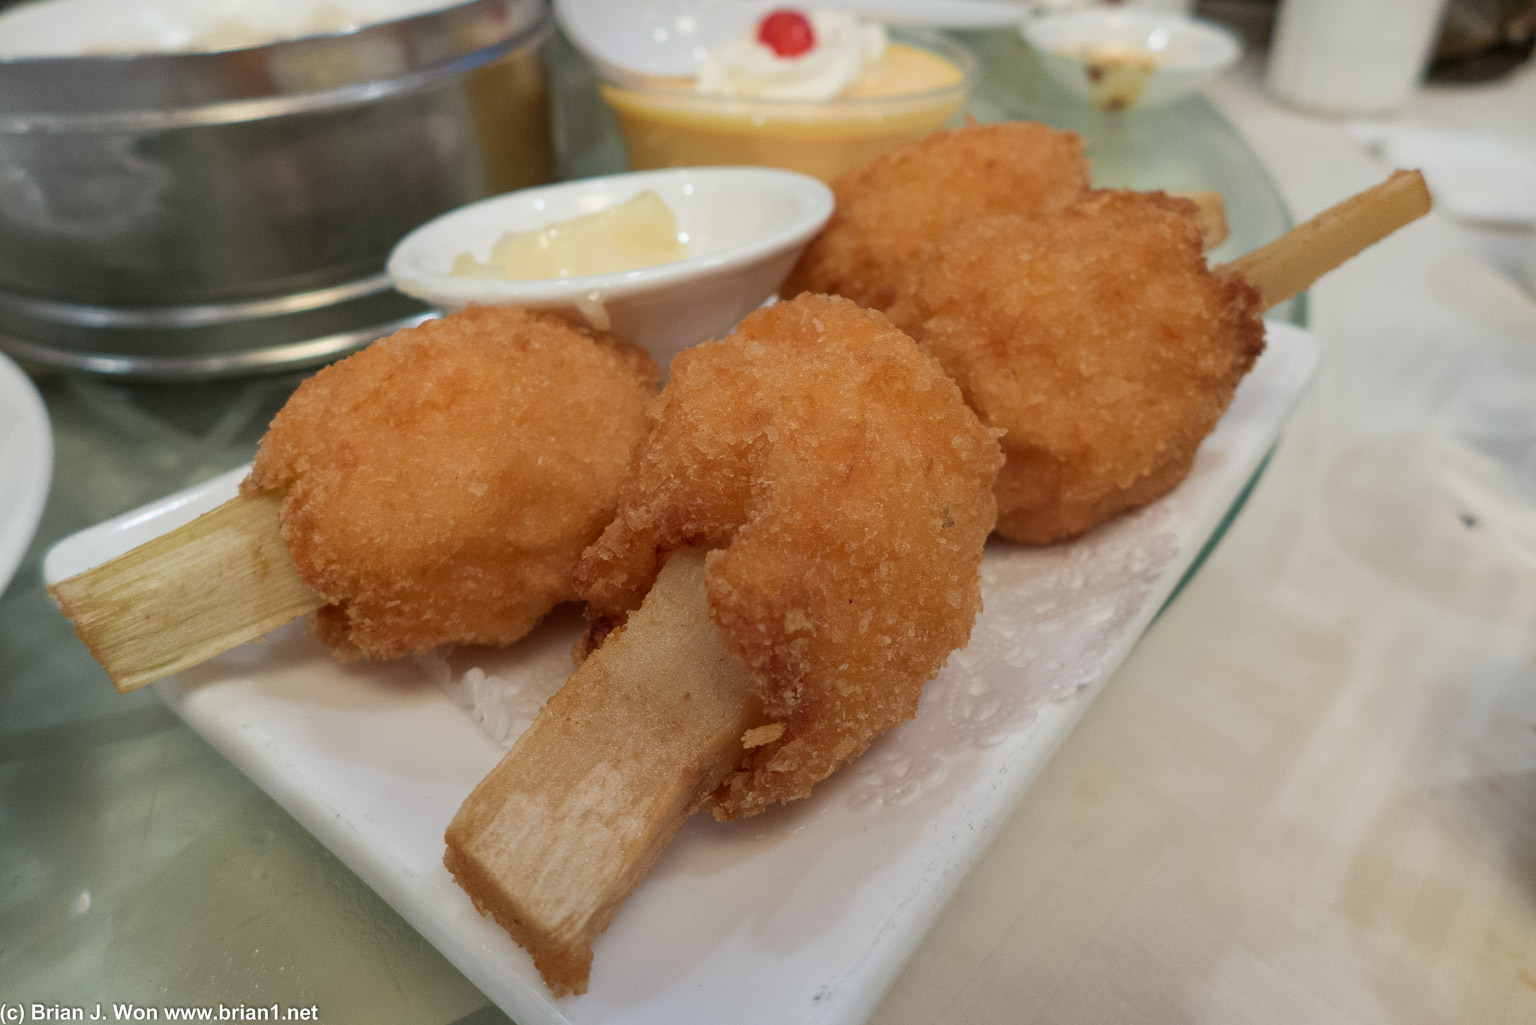 Deep fried shrimp ball. Sizes were a bit uneven, but pretty good otherwise.